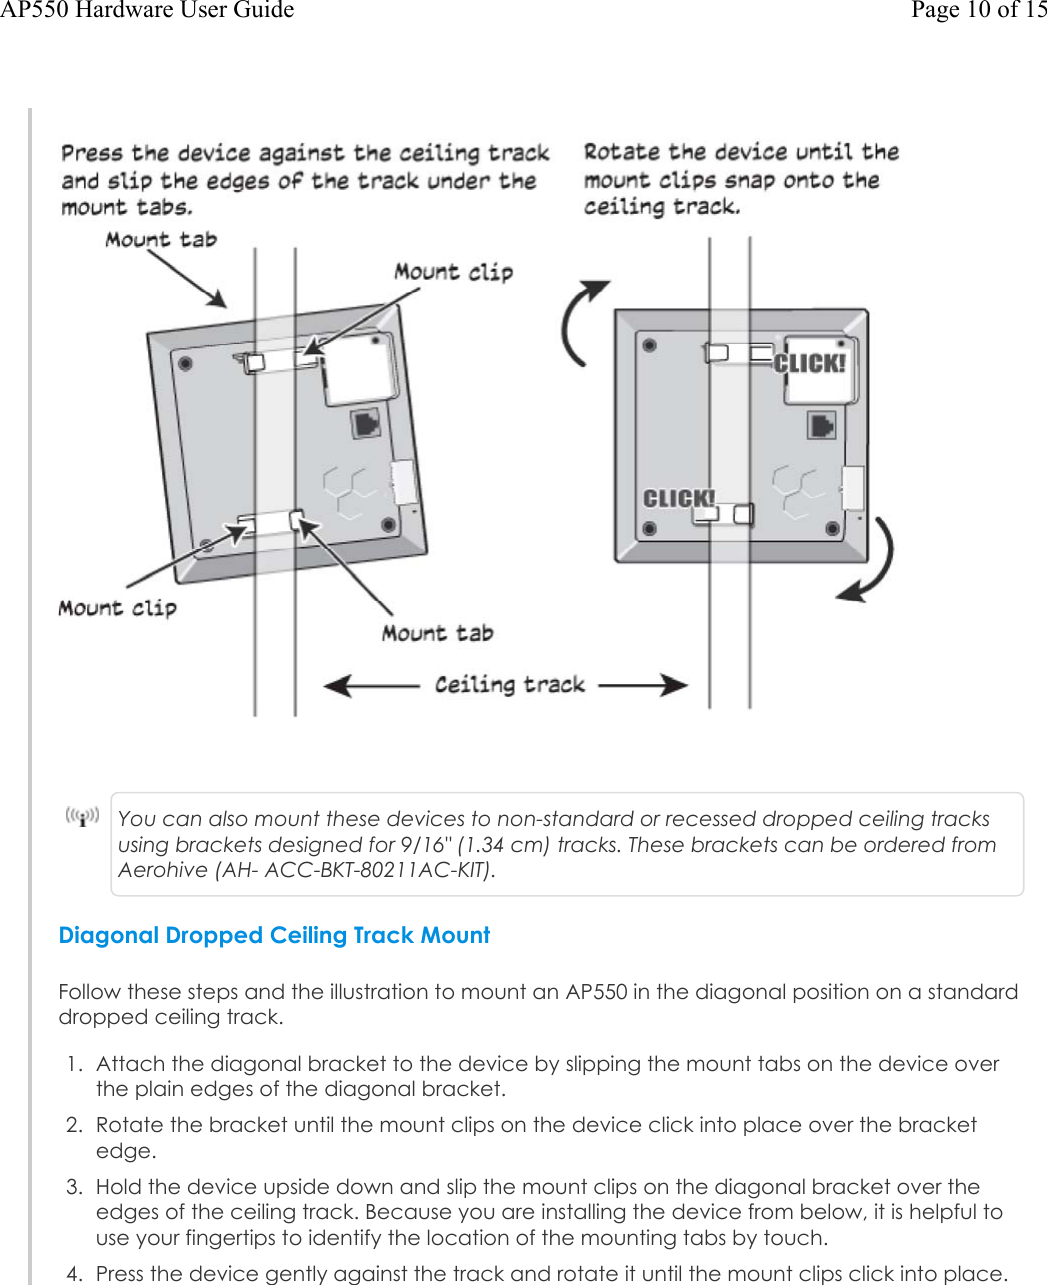 You can also mount these devices to non-standard or recessed dropped ceiling tracks using brackets designed for 9/16&quot; (1.34 cm) tracks. These brackets can be ordered from Aerohive (AH- ACC-BKT-80211AC-KIT).Diagonal Dropped Ceiling Track MountFollow these steps and the illustration to mount an AP550 in the diagonal position on a standard dropped ceiling track.1. Attach the diagonal bracket to the device by slipping the mount tabs on the device overthe plain edges of the diagonal bracket.2. Rotate the bracket until the mount clips on the device click into place over the bracketedge.3. Hold the device upside down and slip the mount clips on the diagonal bracket over theedges of the ceiling track. Because you are installing the device from below, it is helpful touse your fingertips to identify the location of the mounting tabs by touch.4. Press the device gently against the track and rotate it until the mount clips click into place.Page 10 of 15AP550 Hardware User Guide